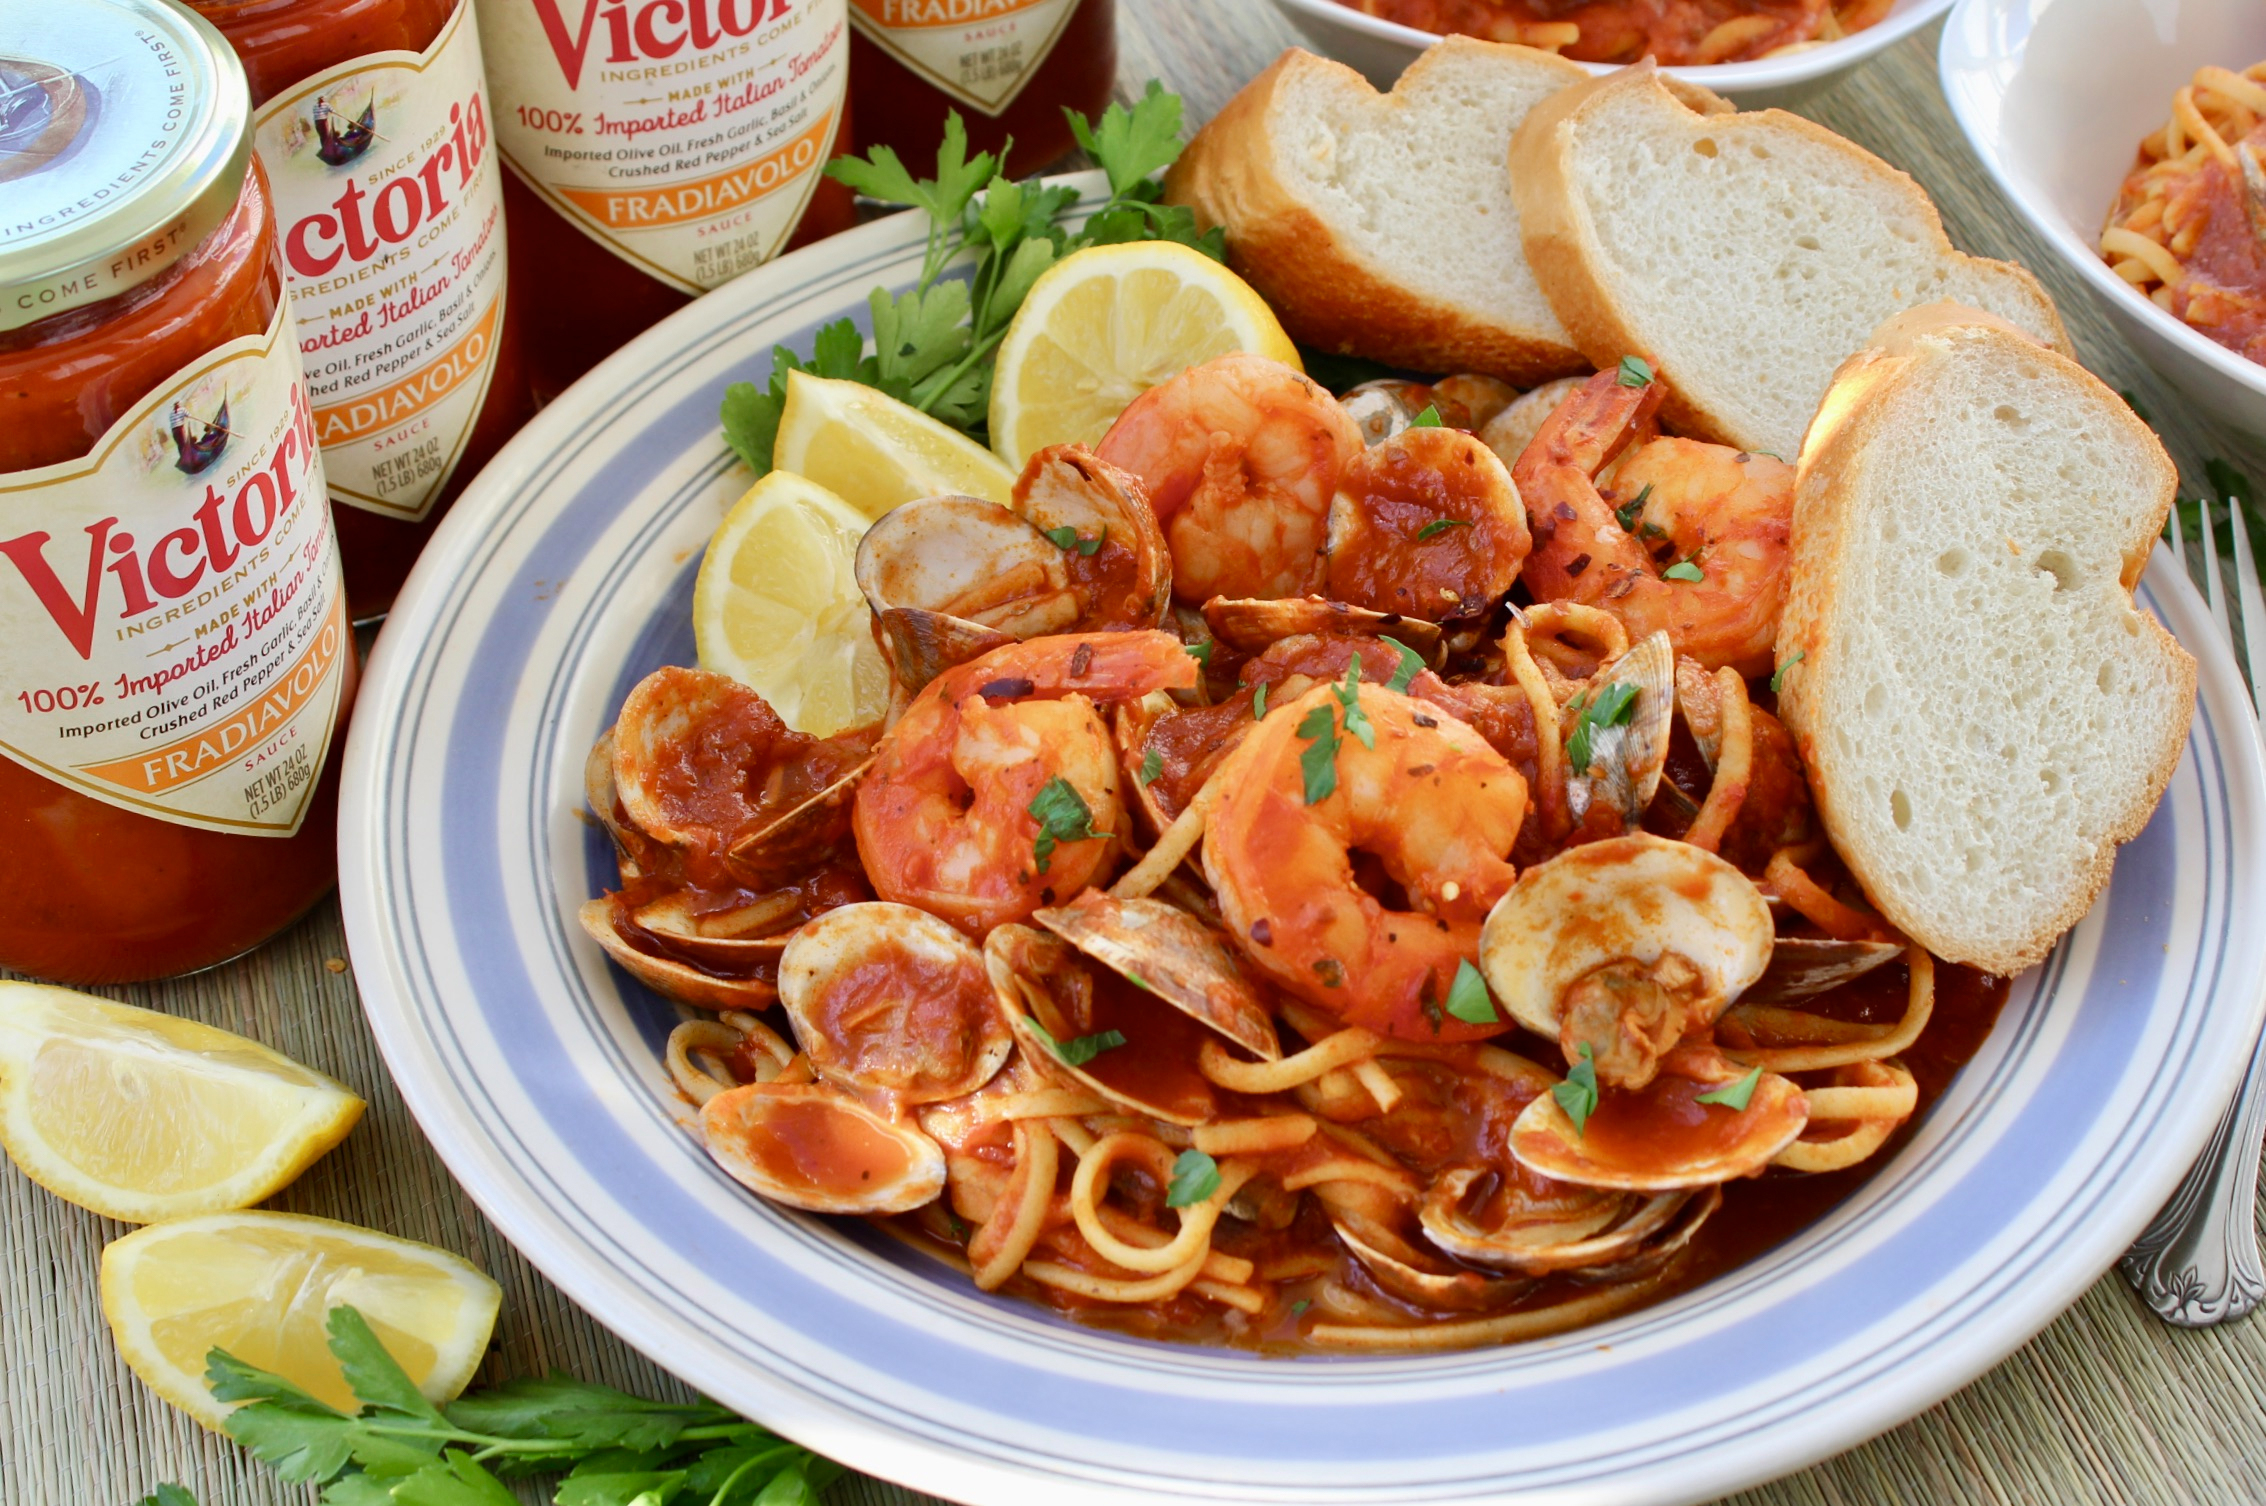 Seafood Fra Diavolo with Victoria Pasta Sauce